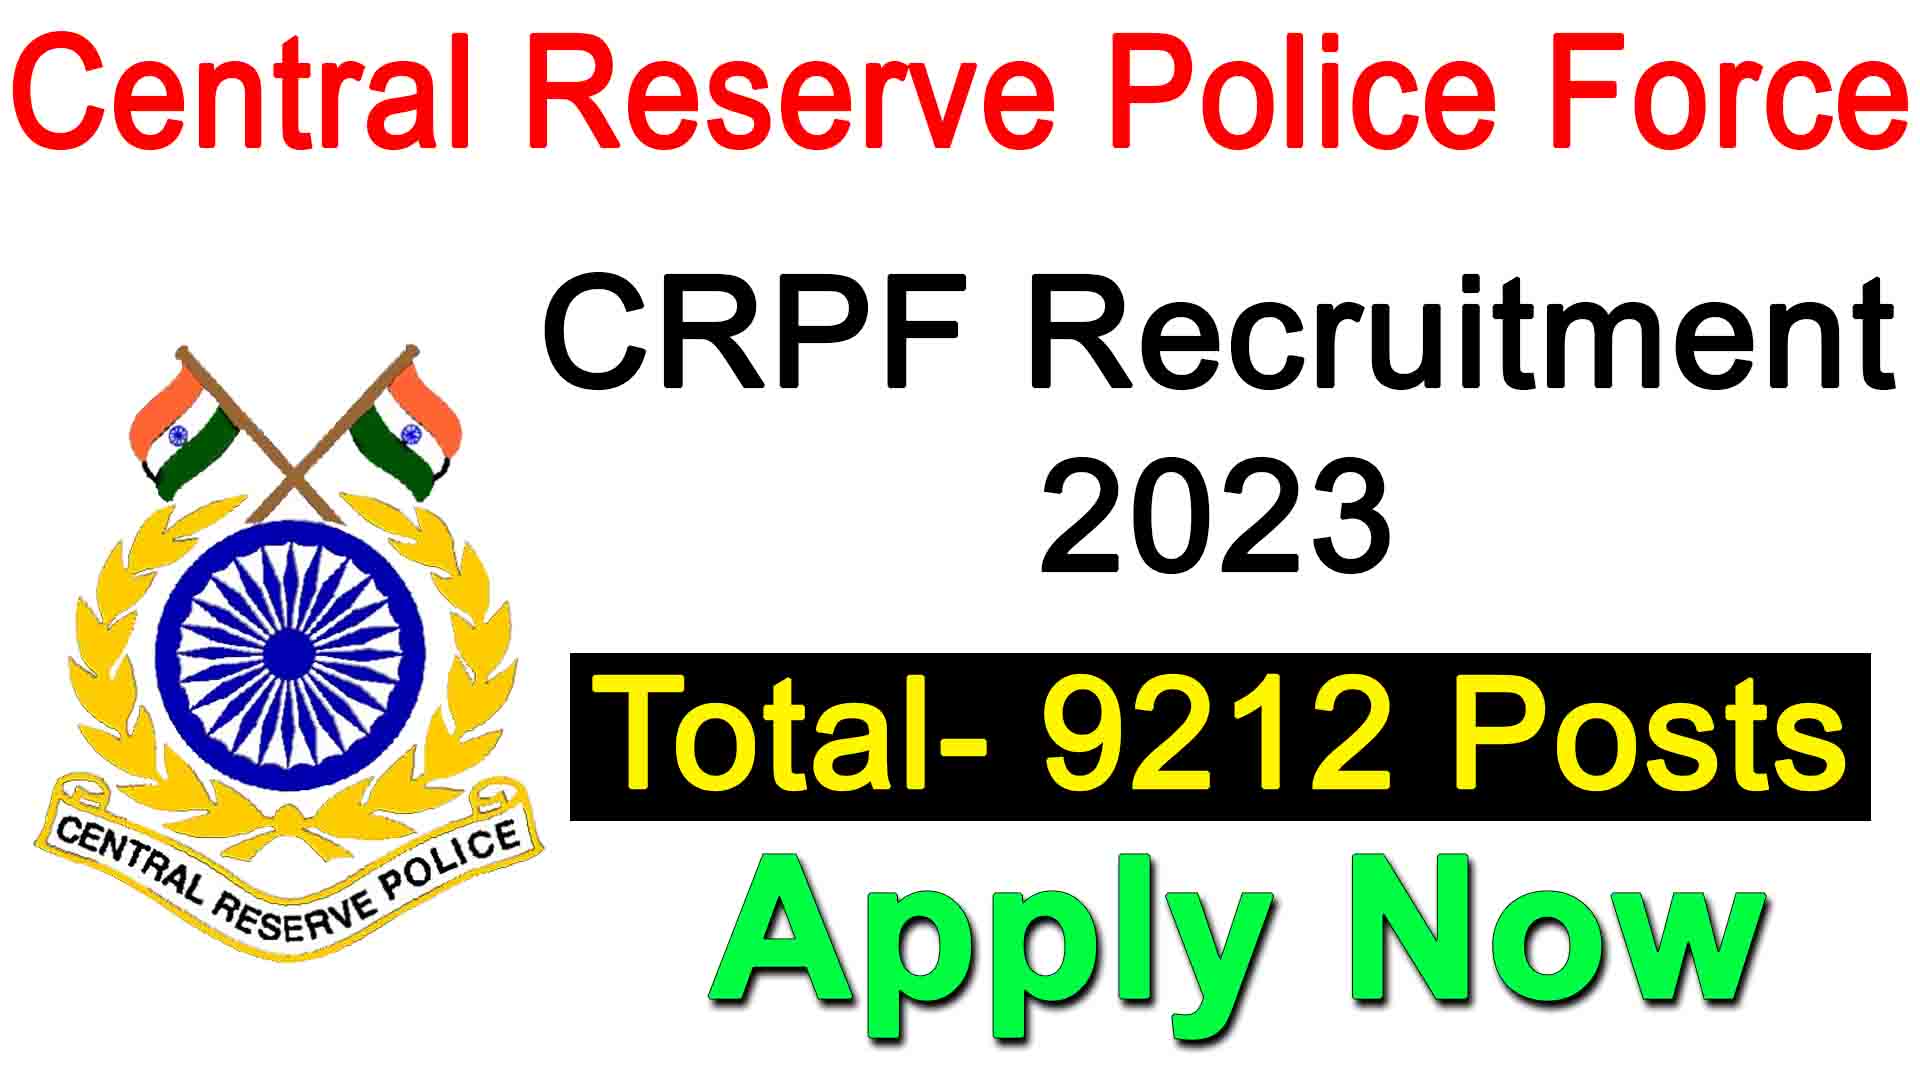 Great opportunity to get a job in the Central Reserve Police Force, See Full Details